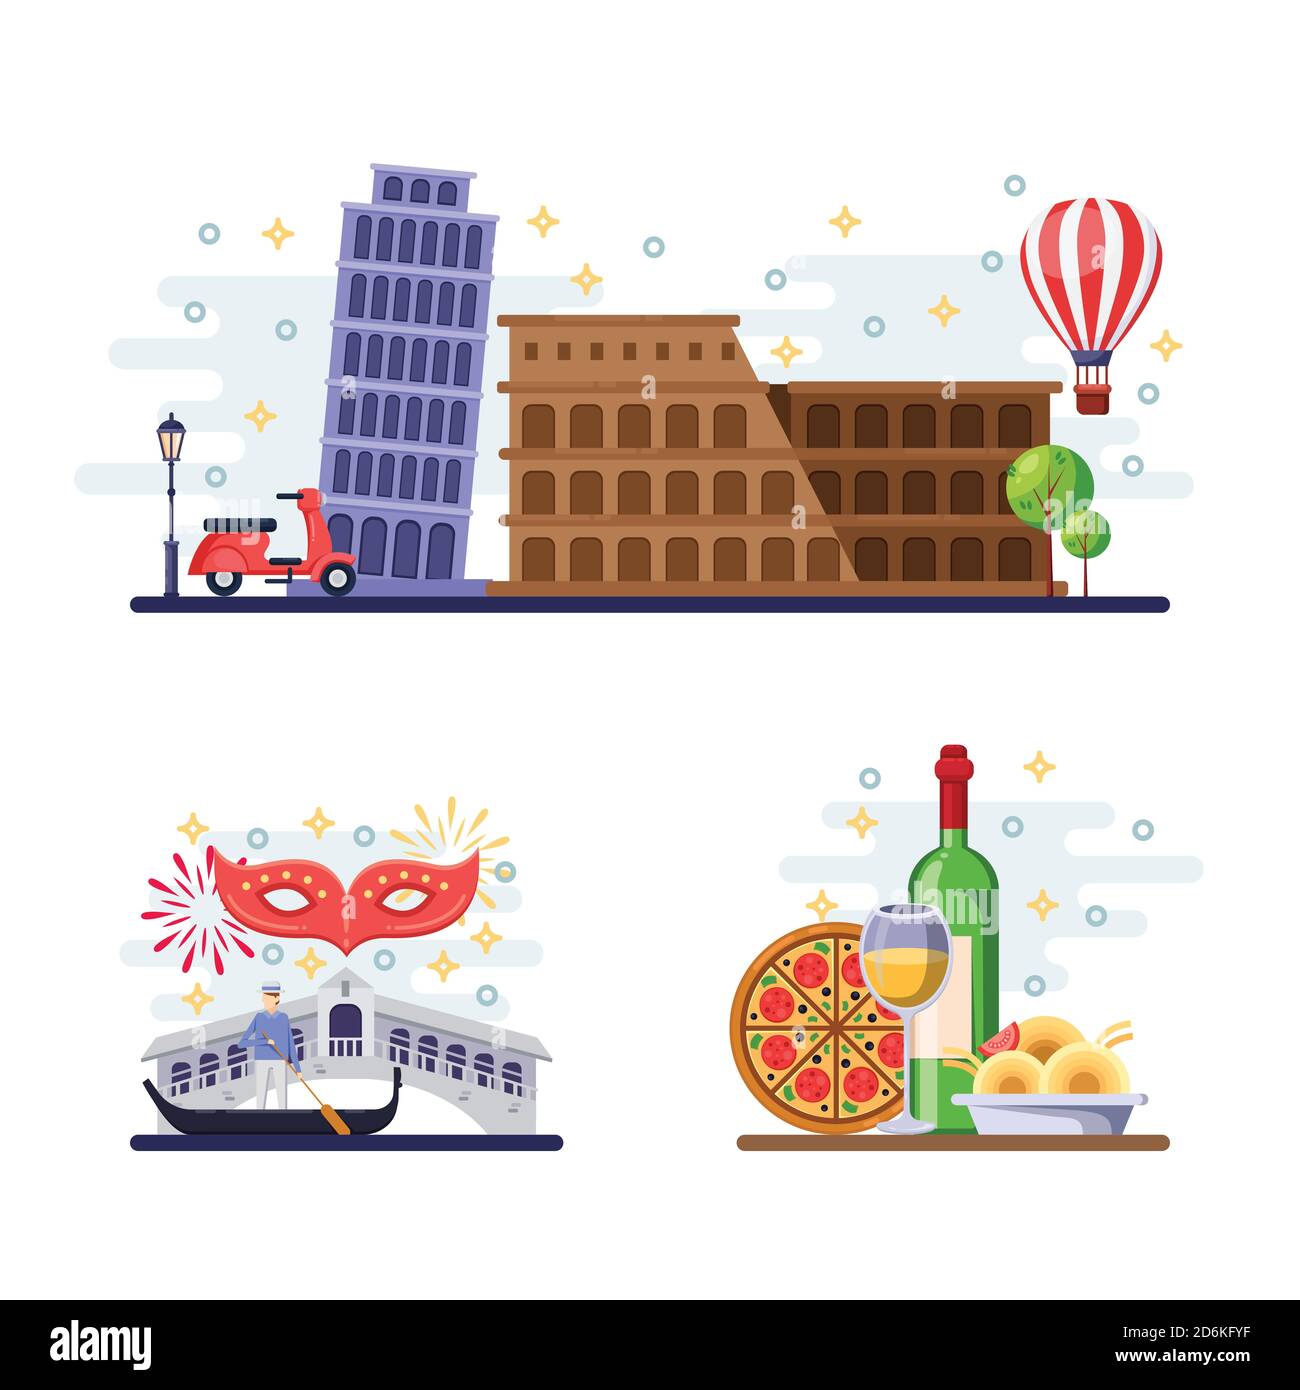 Travel to Italy vector flat illustration. Rome, Pisa and Venice city symbols, landmarks and food. Italian icons and design elements. Stock Vector